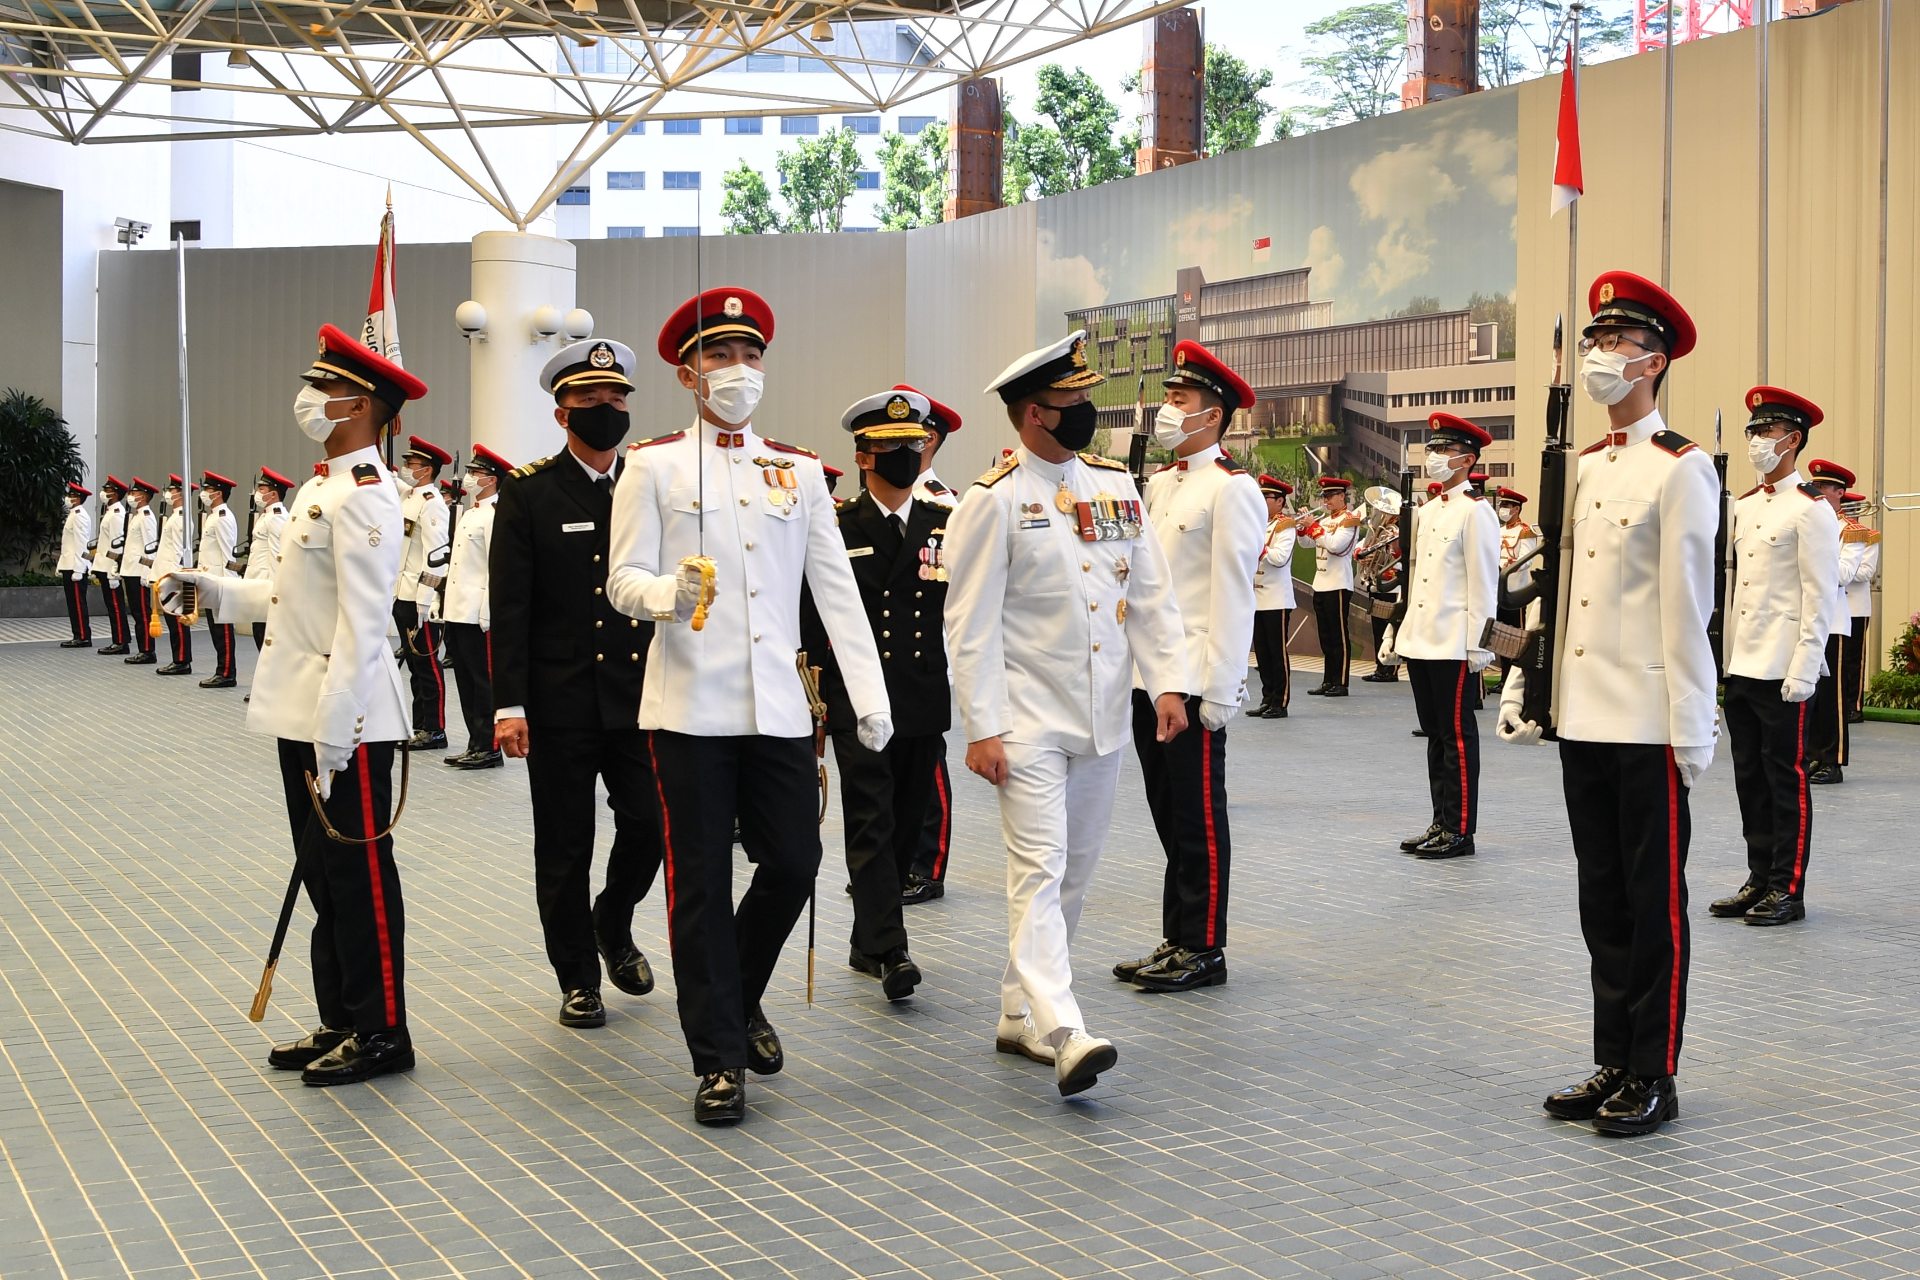 VADM Noonan inspecting the Guard of Honour at MINDEF prior to the award investiture.